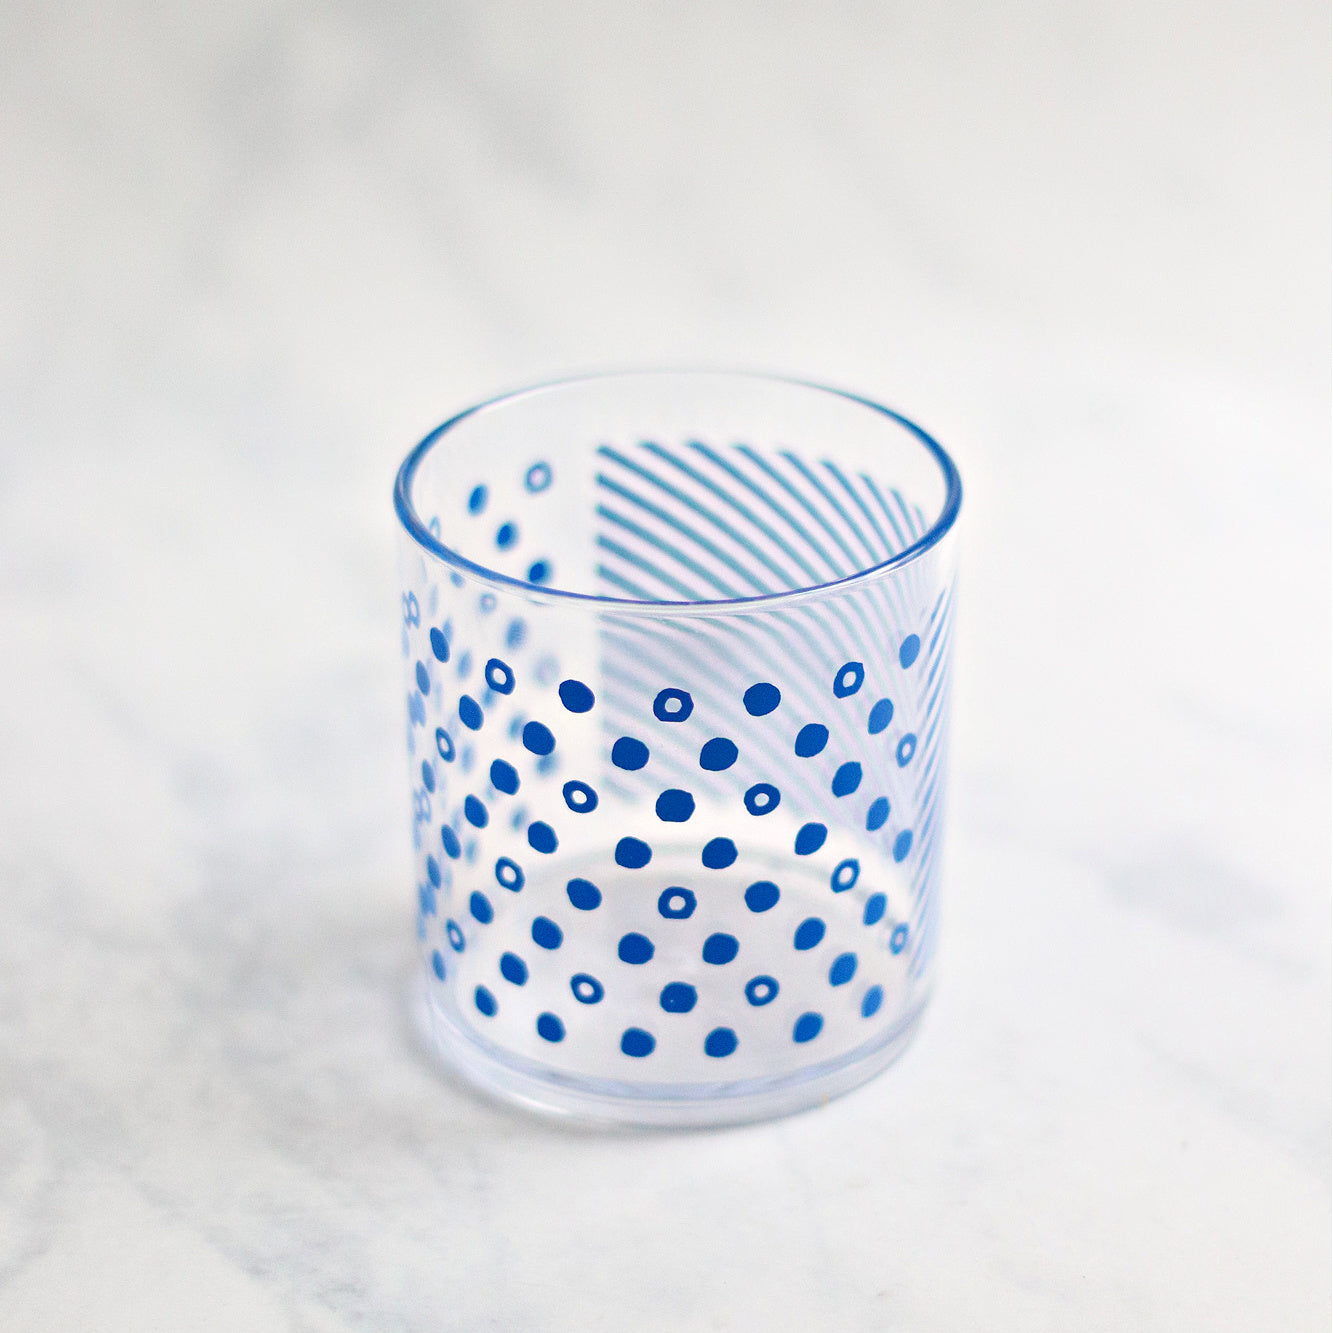 A clear PBA Free tumbler for kids with printed blue design